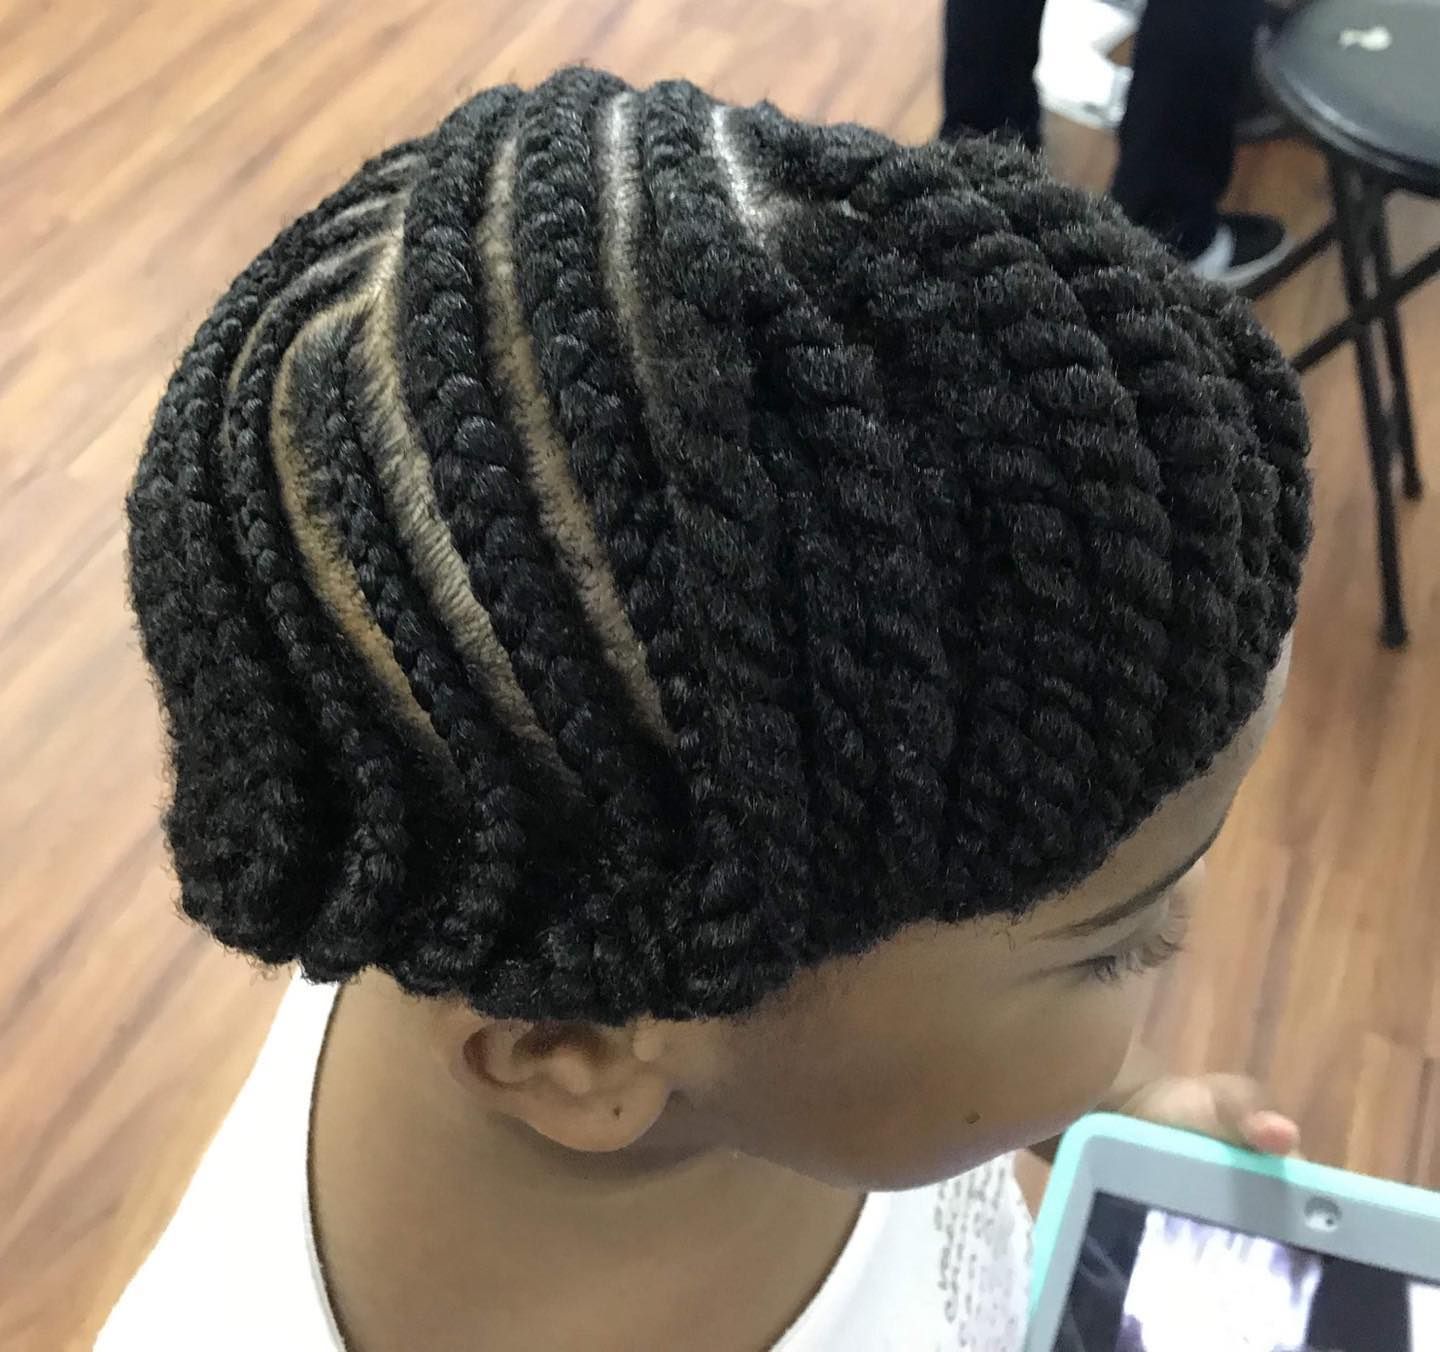 23. Weaves And Twists in a Crown